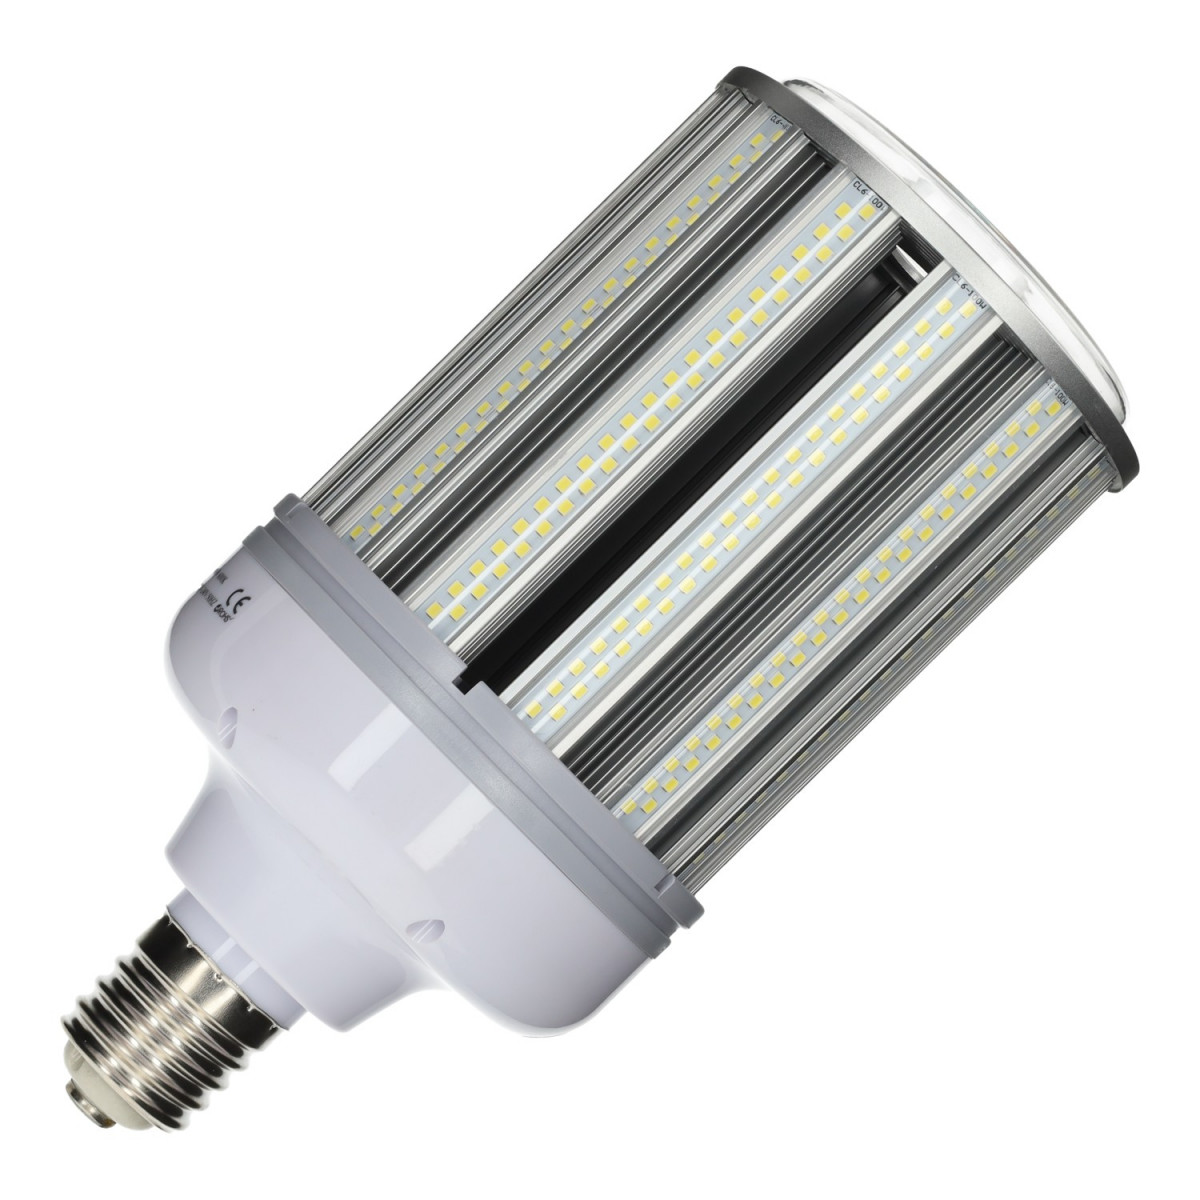 LED-Lampe Öffentliche Beleuchtung 100W Professional Serie